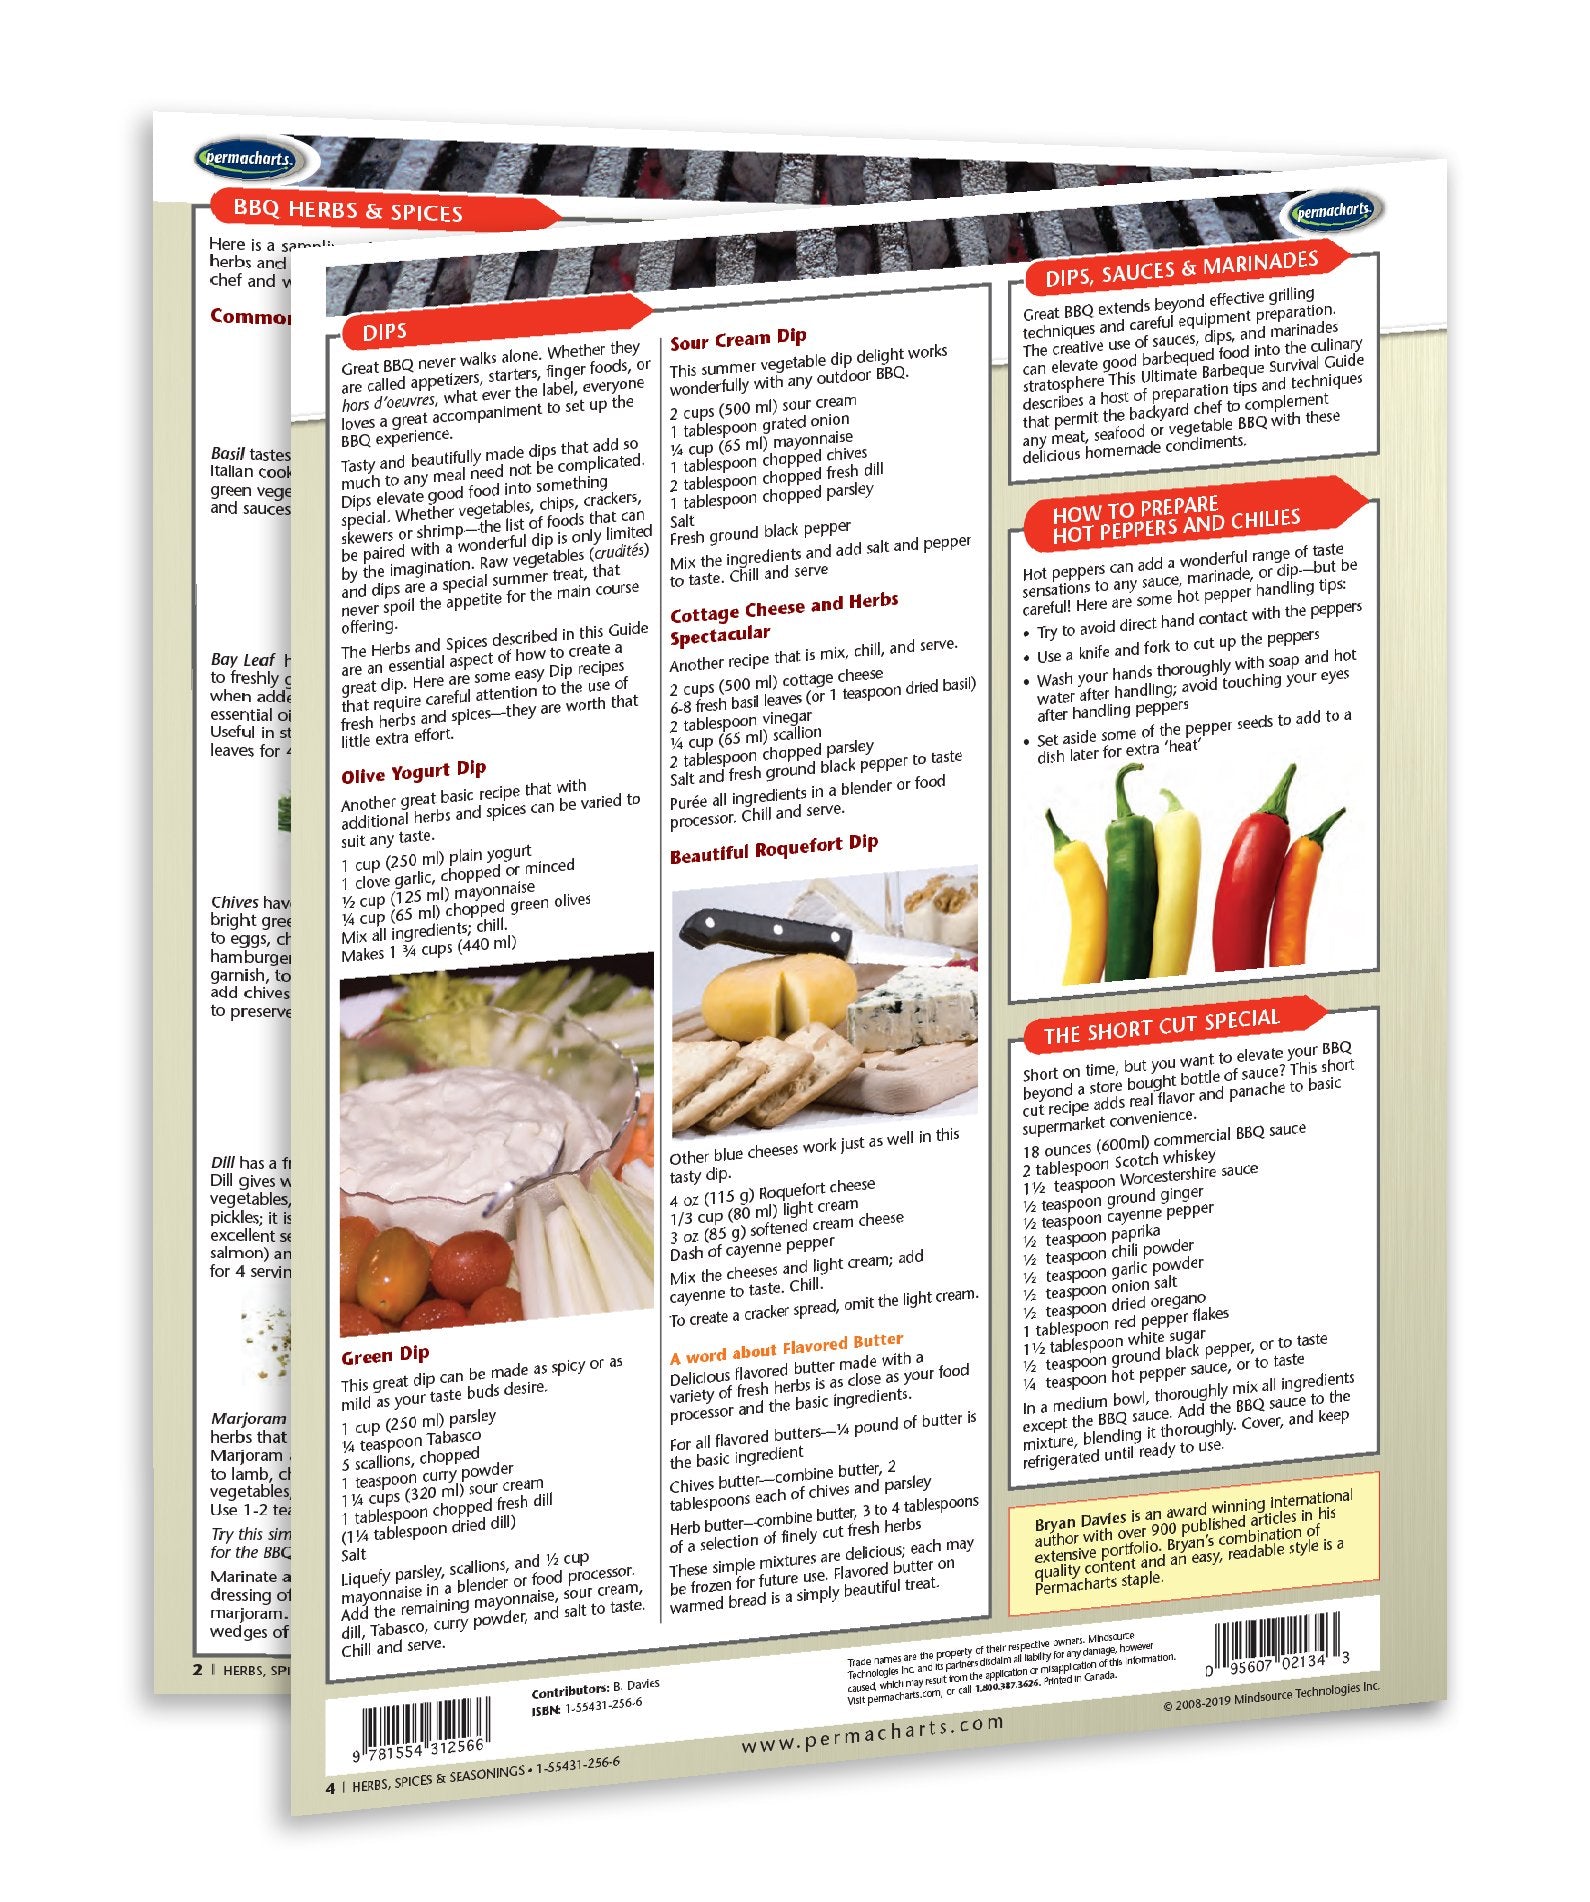 Herbs, Spices & Seasoning Guide - Food & Drink Quick Reference Guide by Permacharts